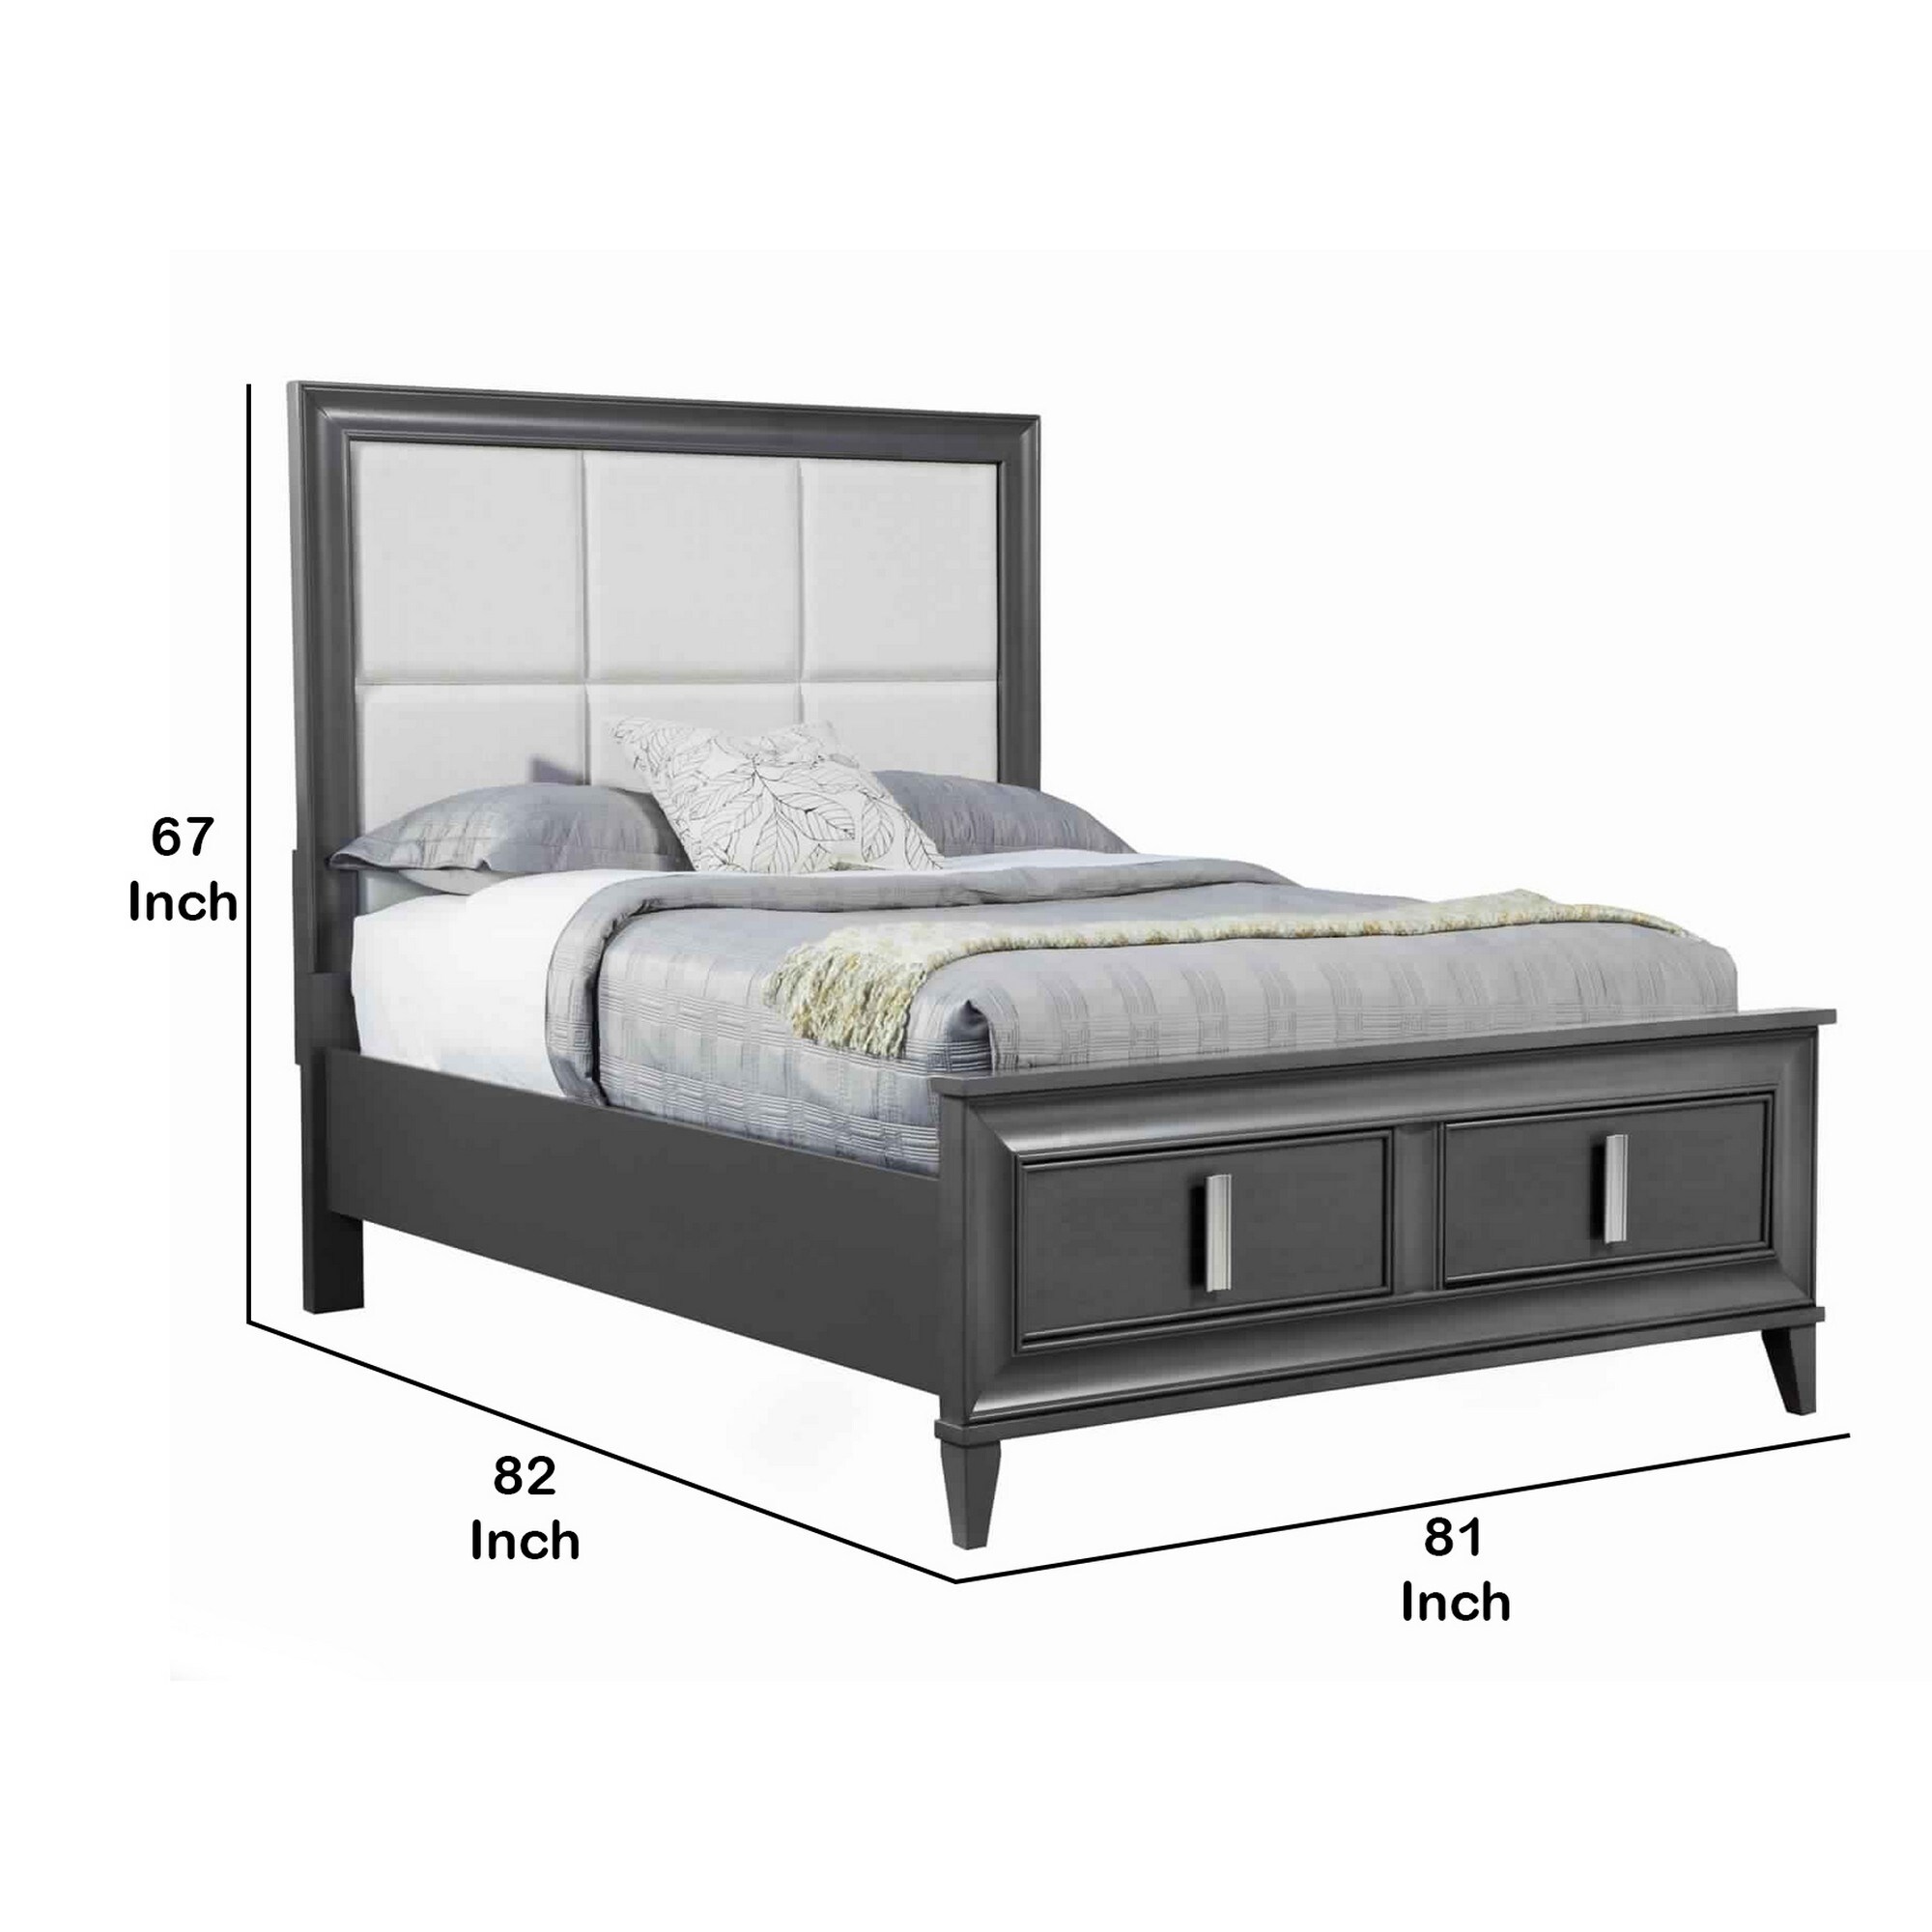 Transitional Standard King Storage Bed with Fabric Headboard, Gray and Cream